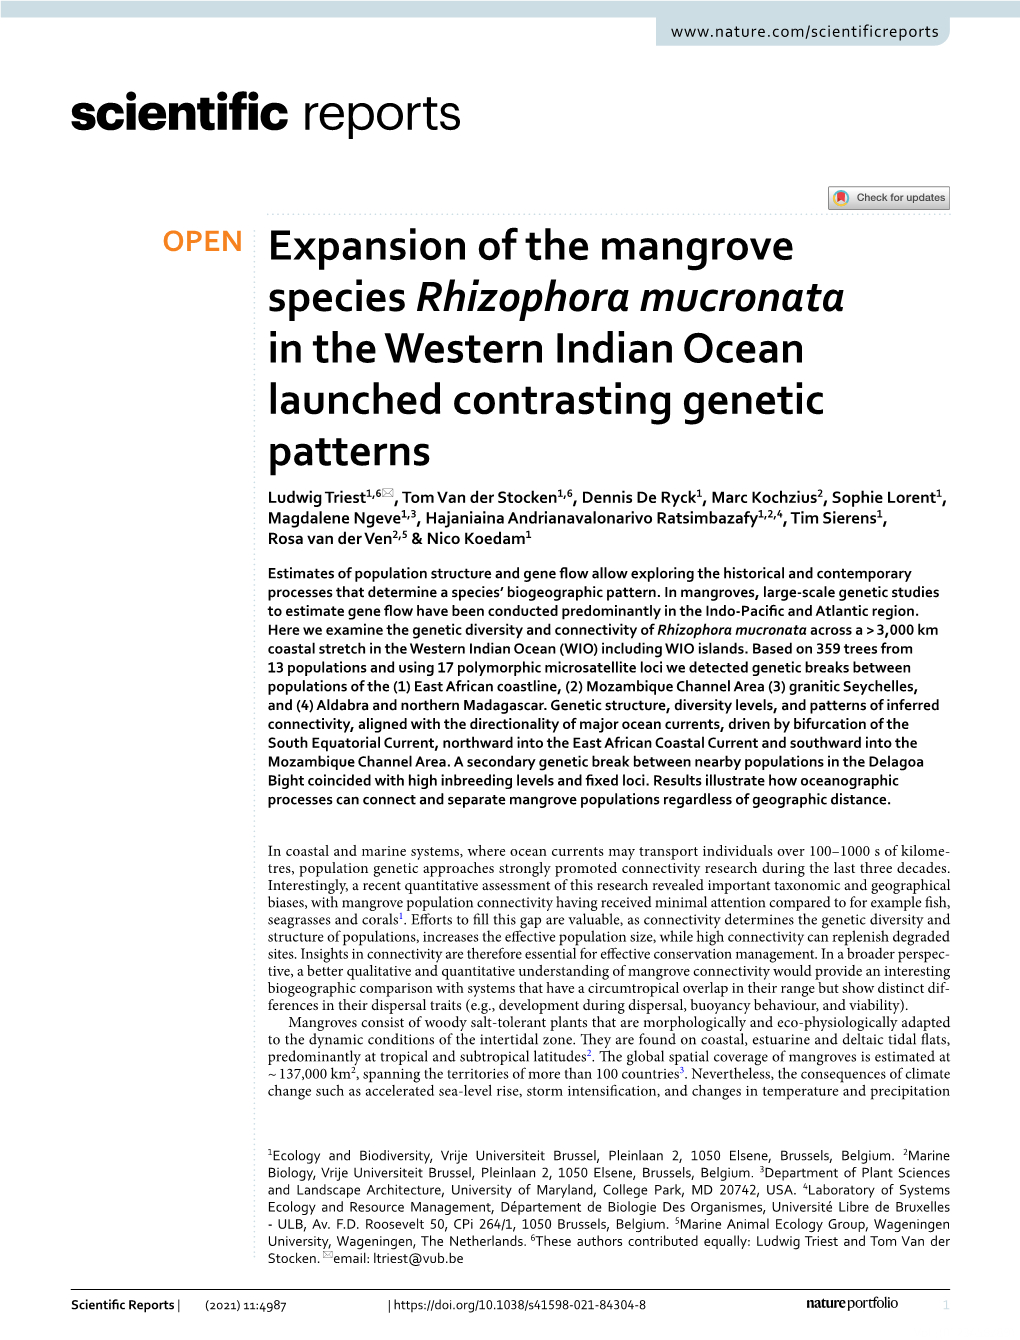 Expansion of the Mangrove Species Rhizophora Mucronata in The